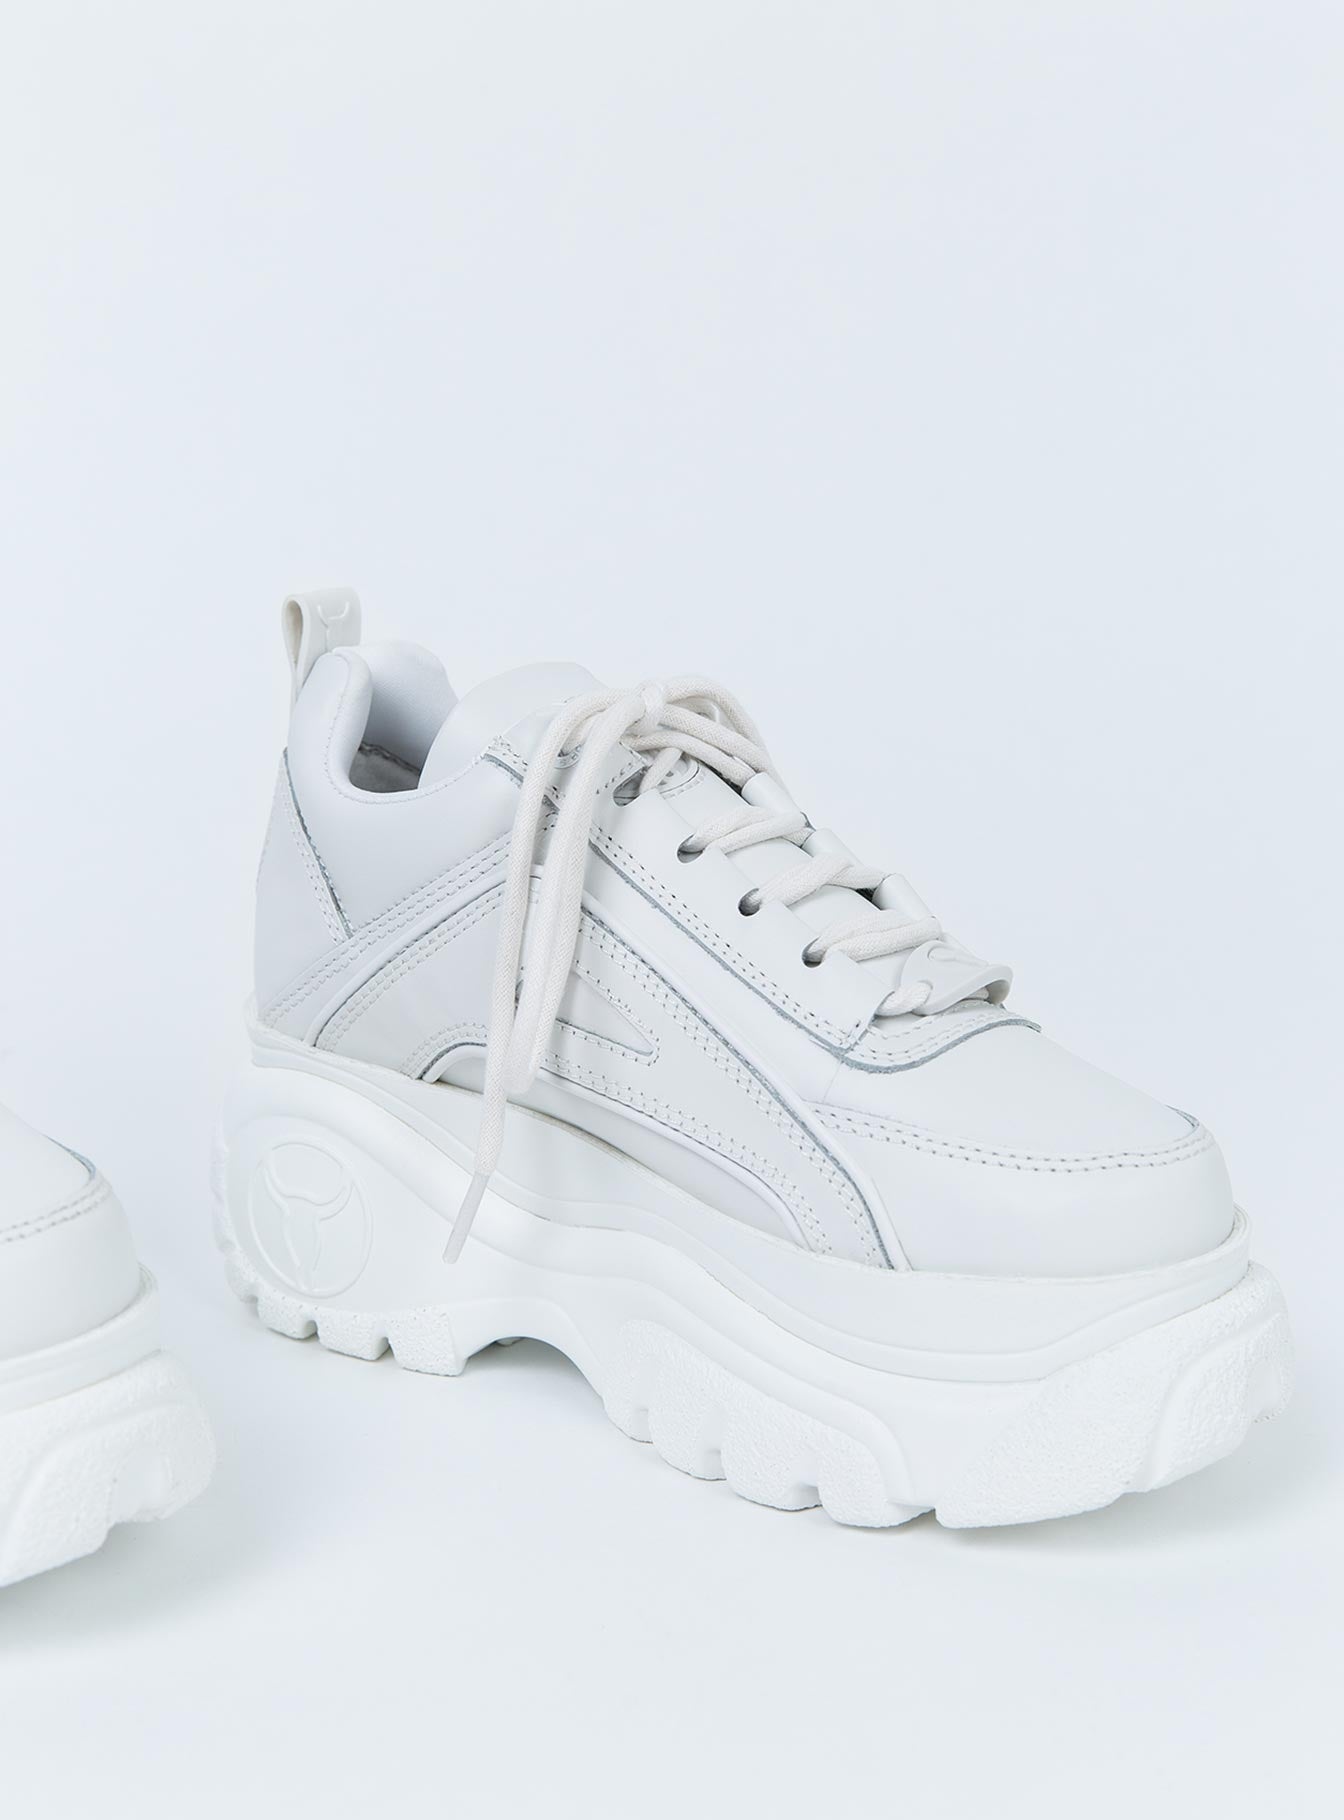 Windsor Smith Lupe Sneaker White